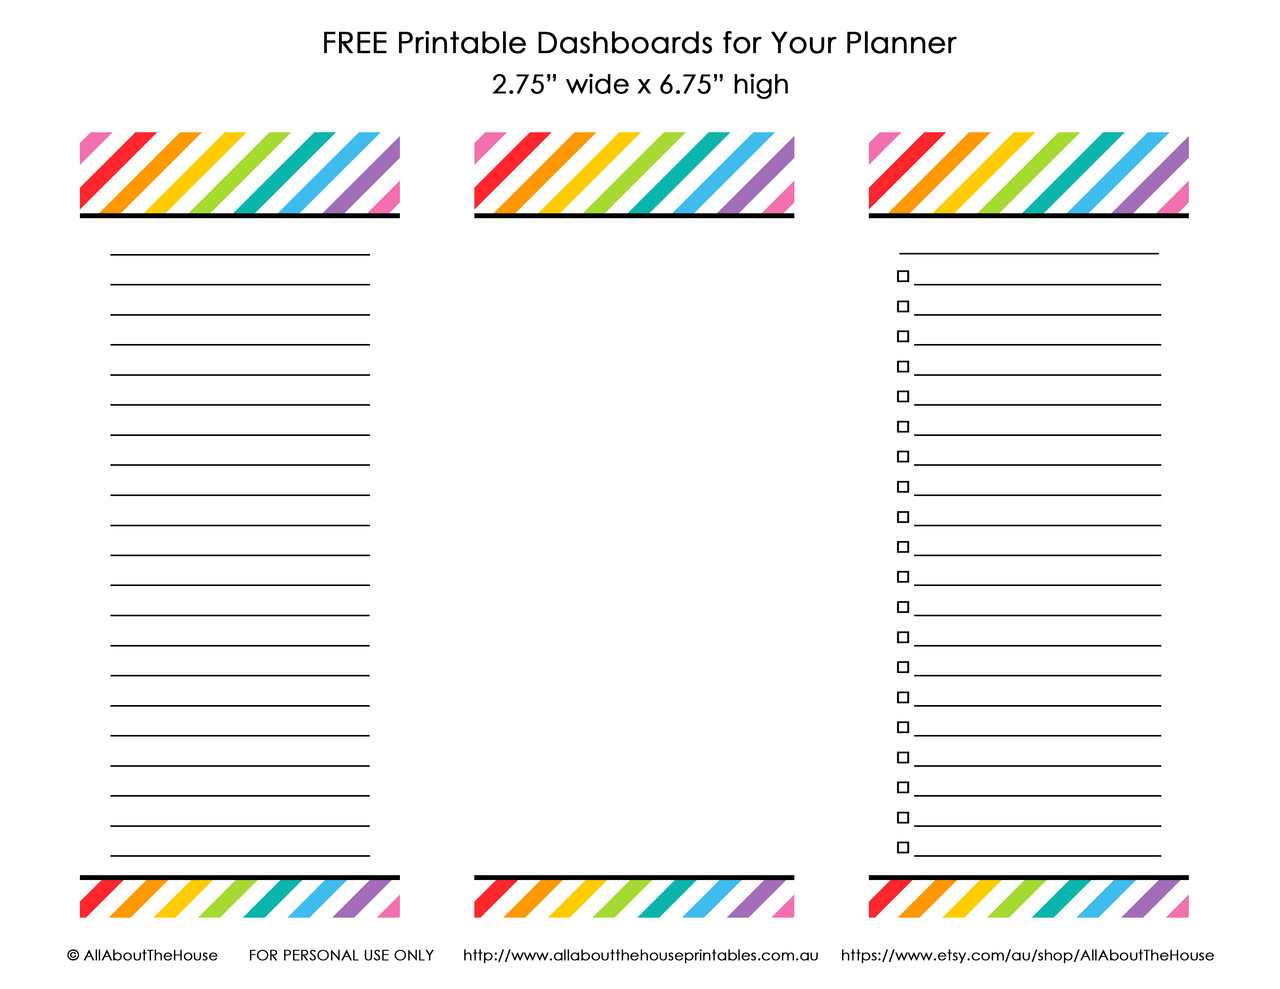 free-planner-dashboard-printable-notepad-2-75-wide-x-6-75-high